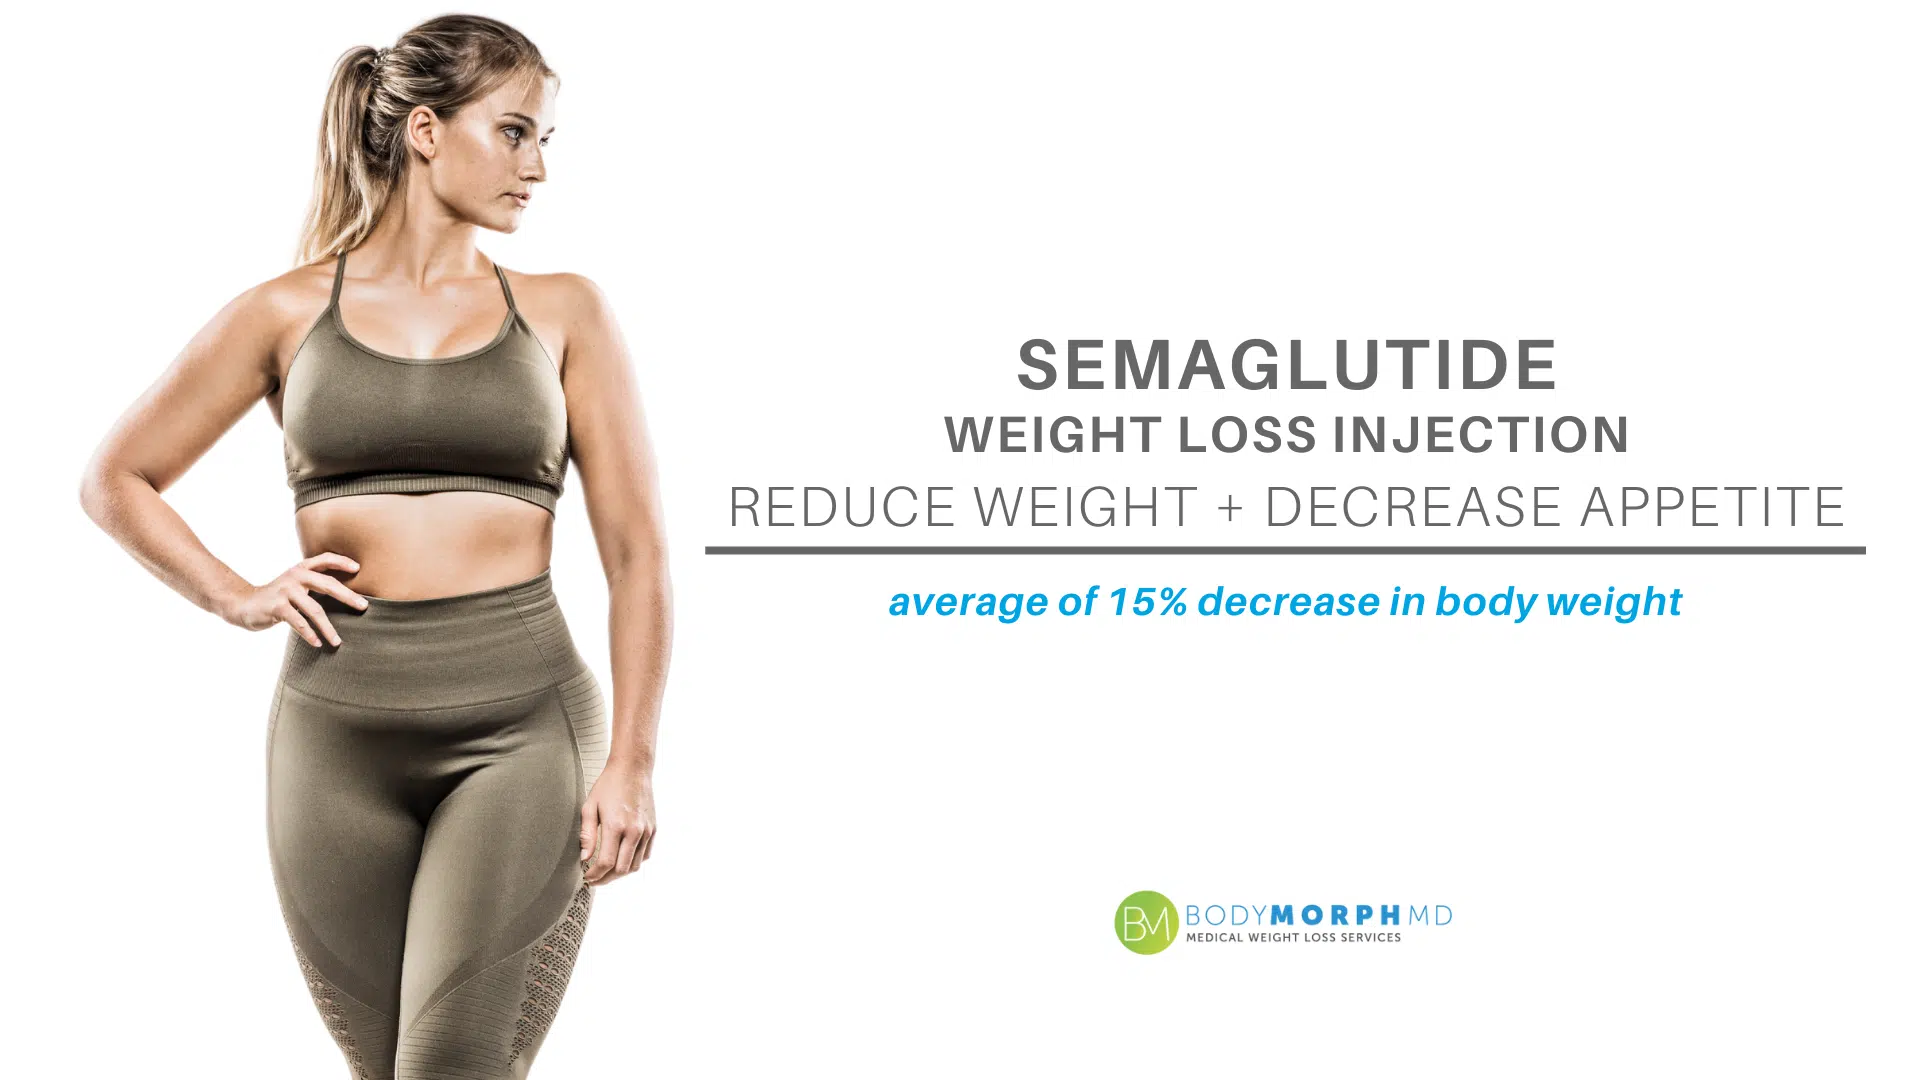 Attractive blonde woman with curves in sportswear promoting Semaglutide injections-a service treatment offered at BodyMorph MD.